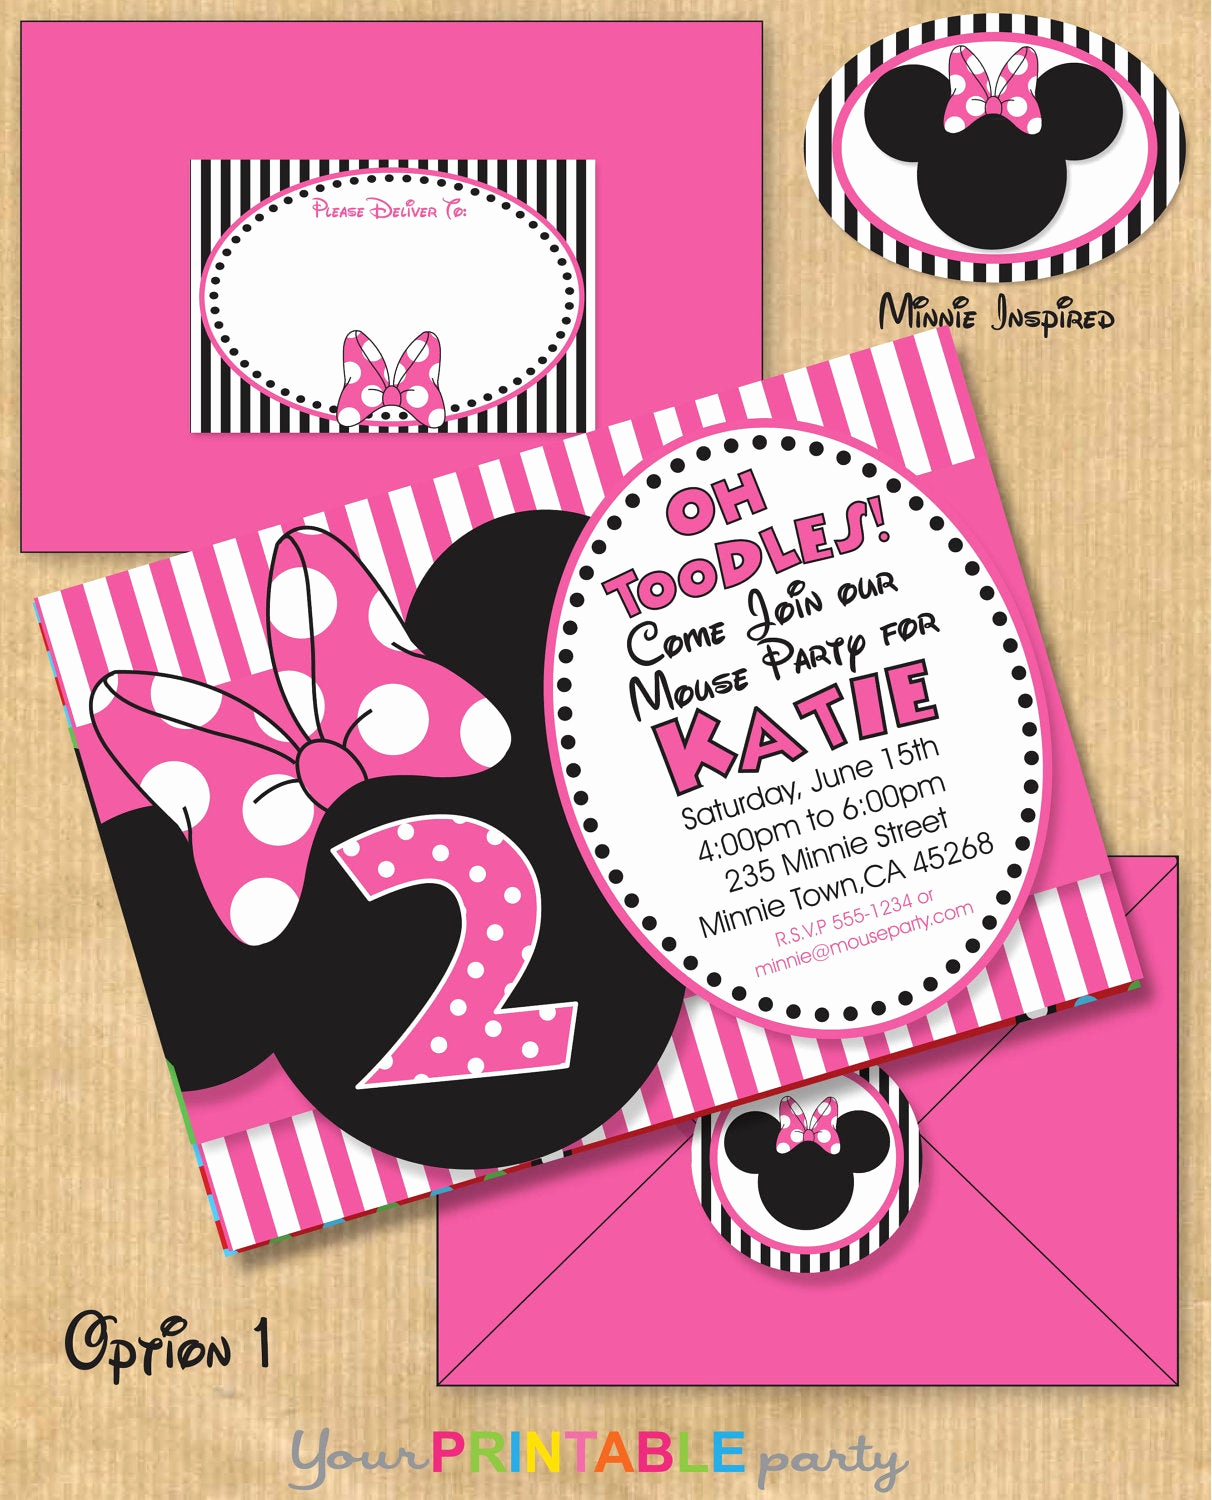 Minnie Mouse Birthday Invitation Wording Beautiful Minnie Mouse Inspired Birthday Party by Yourprintableparty